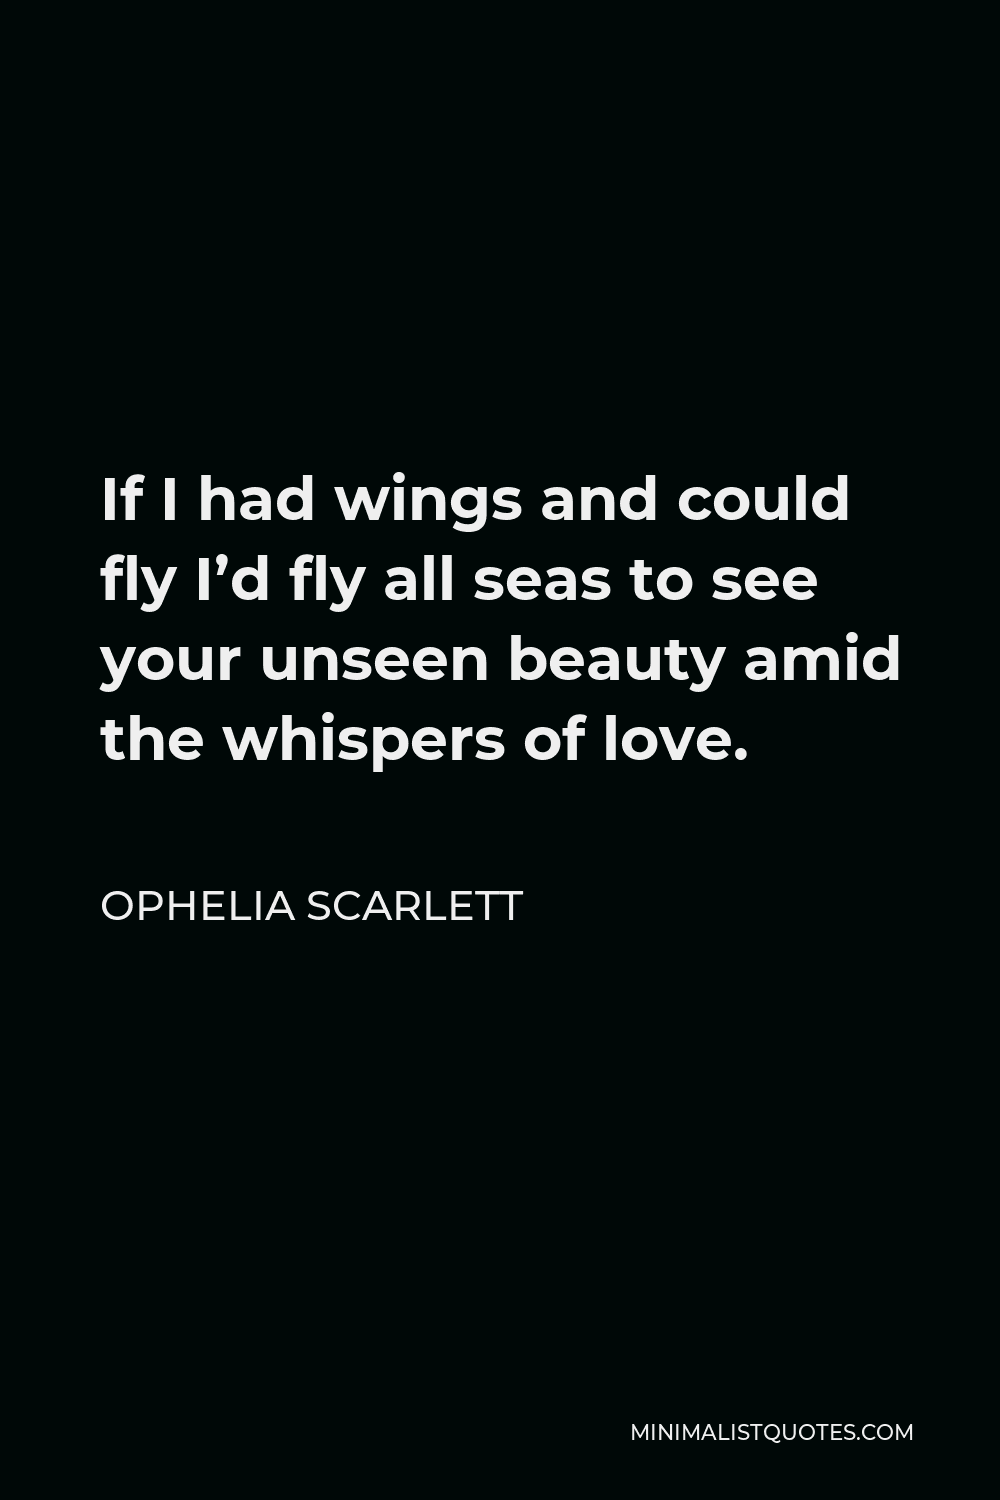 Ophelia Scarlett Quote - If I had wings and could fly I’d fly all seas to see your unseen beauty amid the whispers of love.